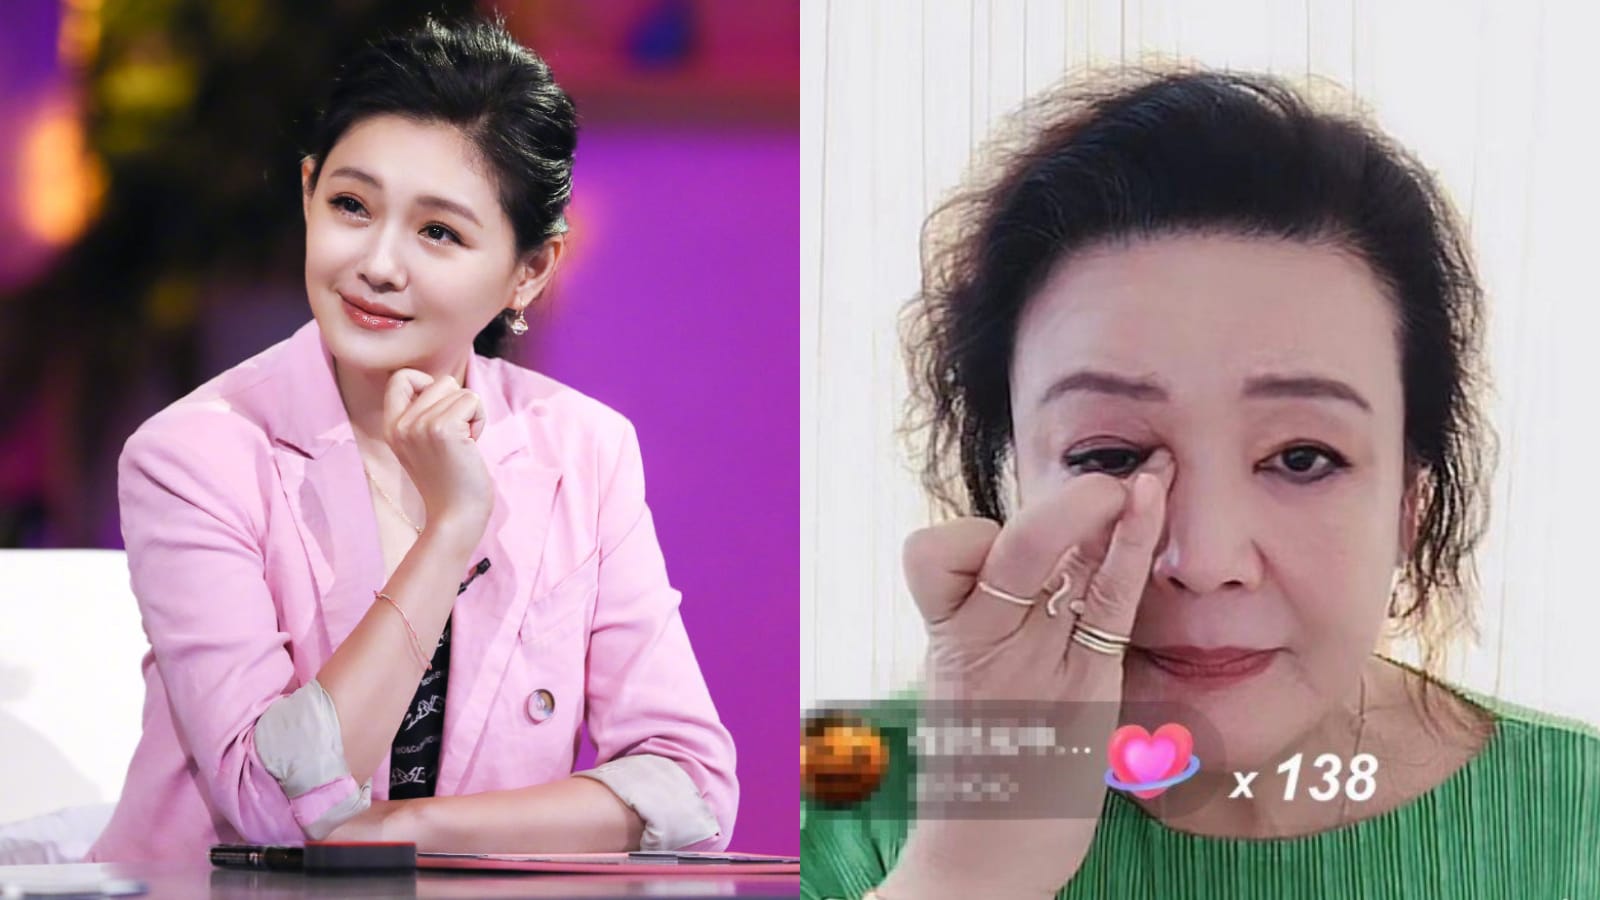 Barbie Hsu’s Mother-In-Law Loses Appeal Against 1-Year Prison Sentence